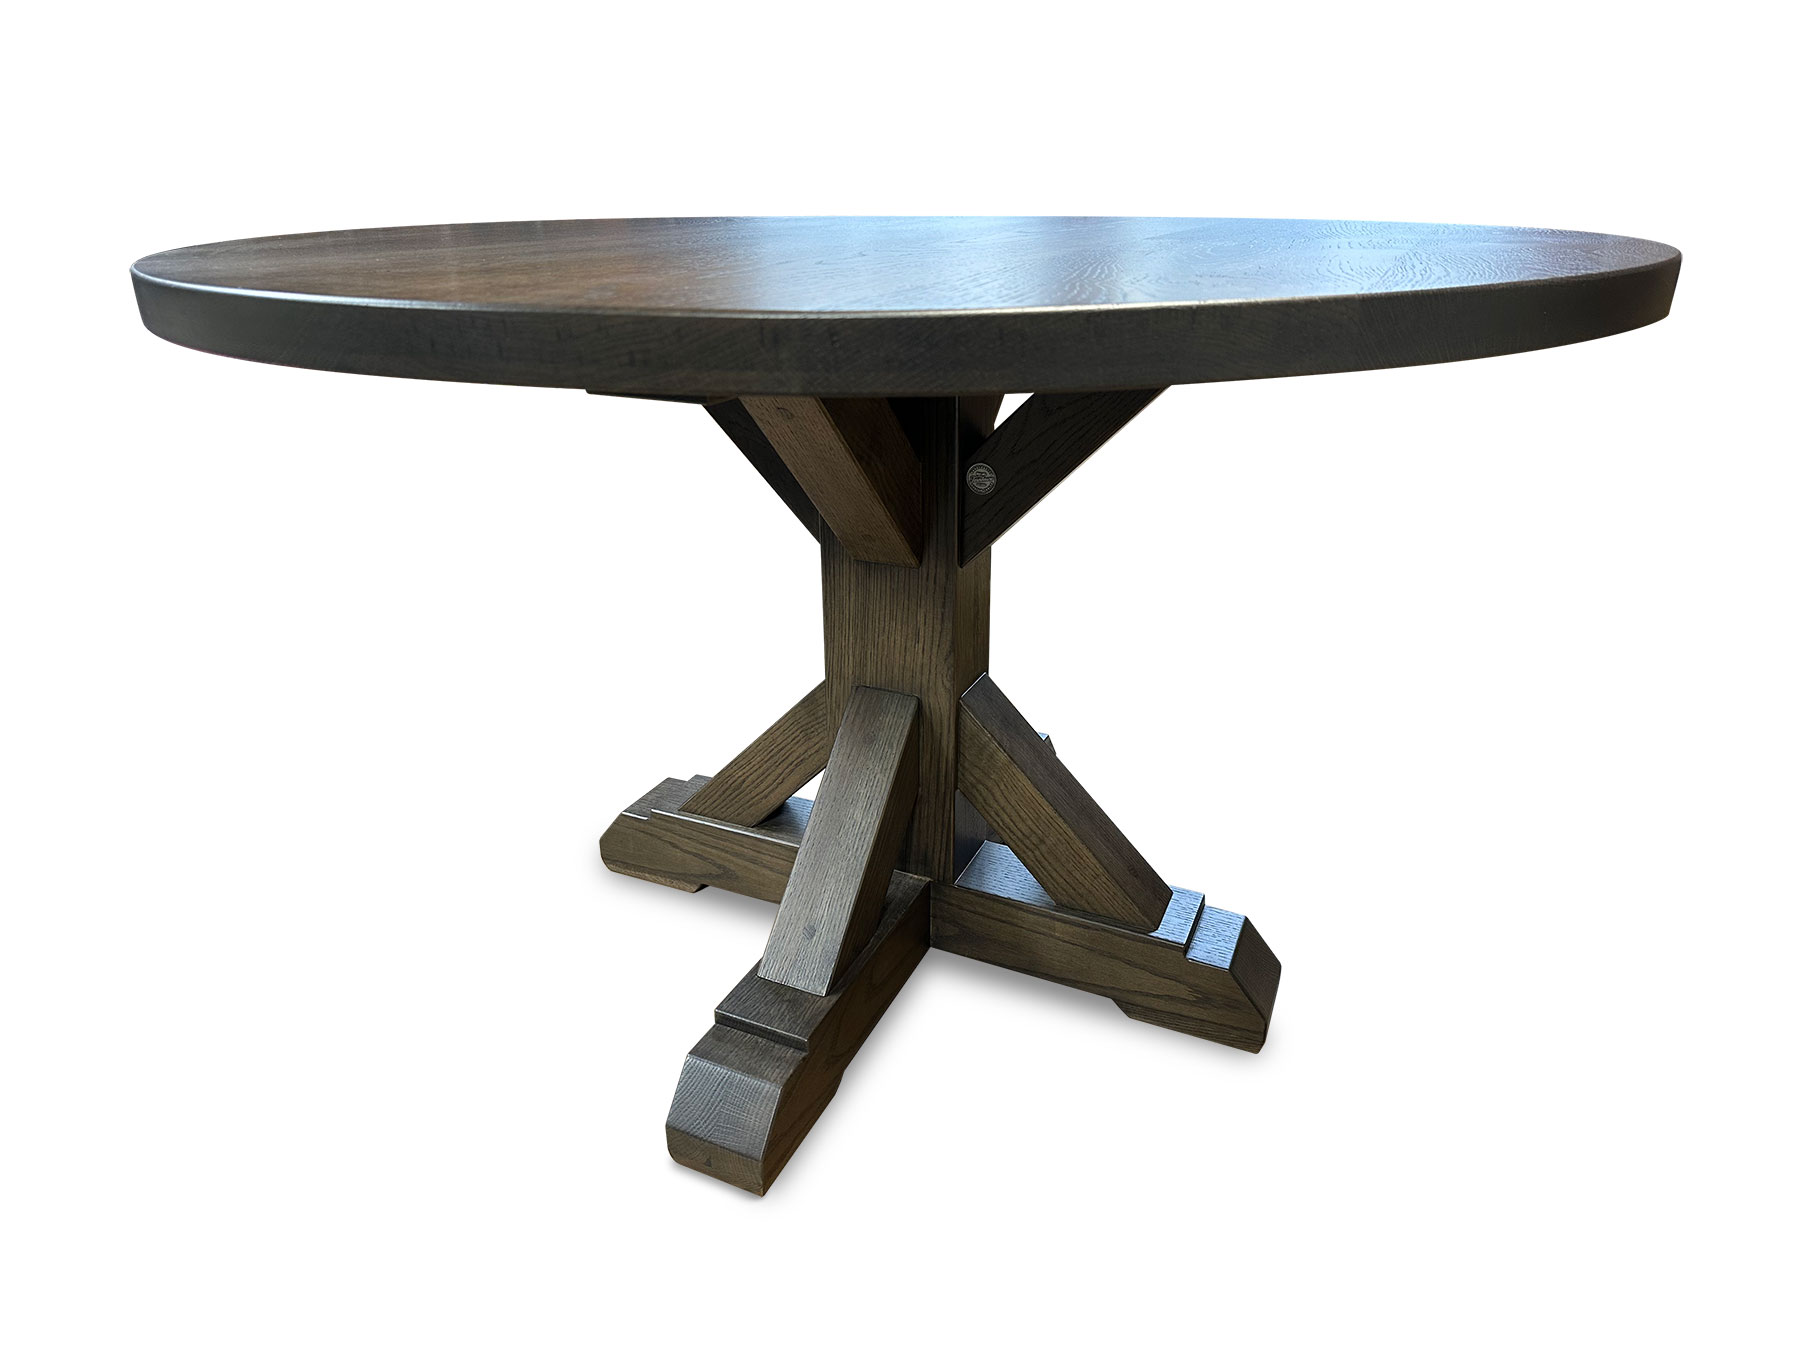 The Moscati Round Pedestal table